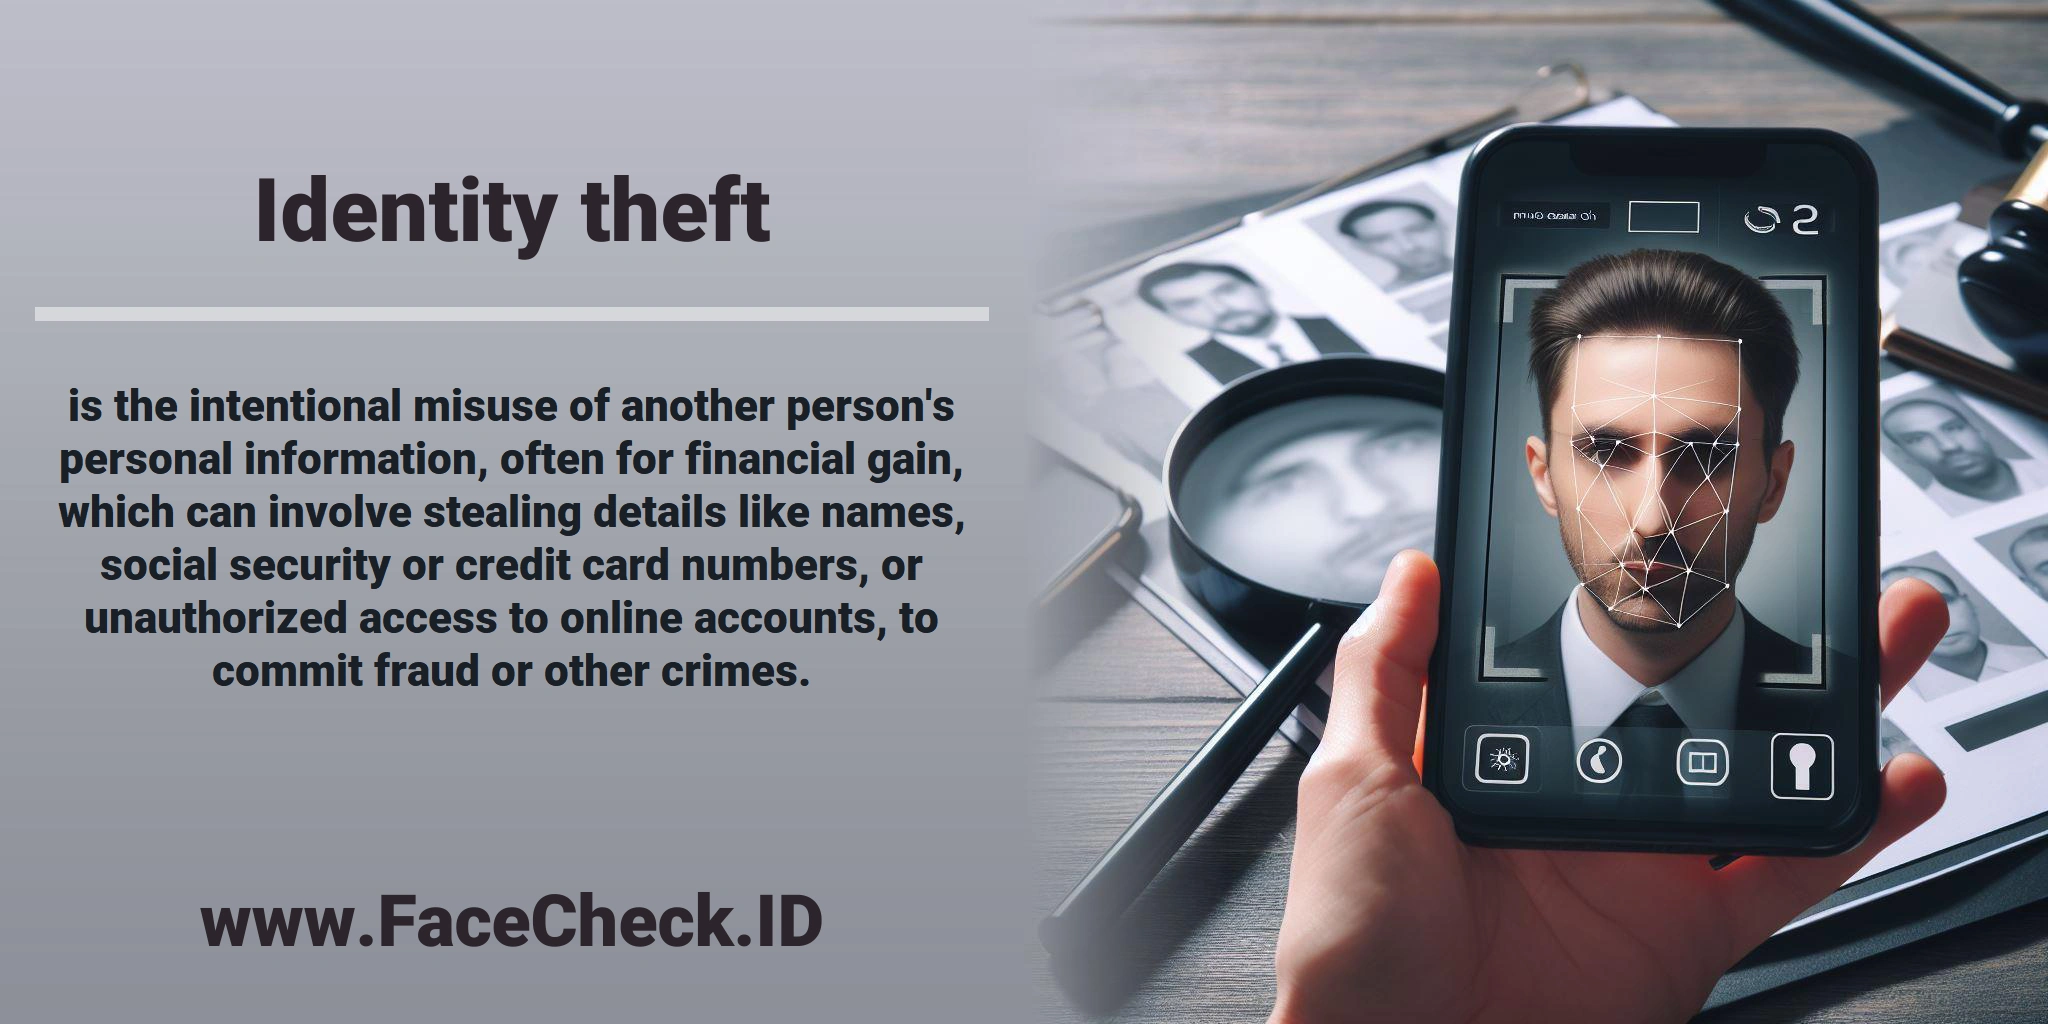 <b>Identity theft</b> is the intentional misuse of another person's personal information, often for financial gain, which can involve stealing details like names, social security or credit card numbers, or unauthorized access to online accounts, to commit fraud or other crimes.